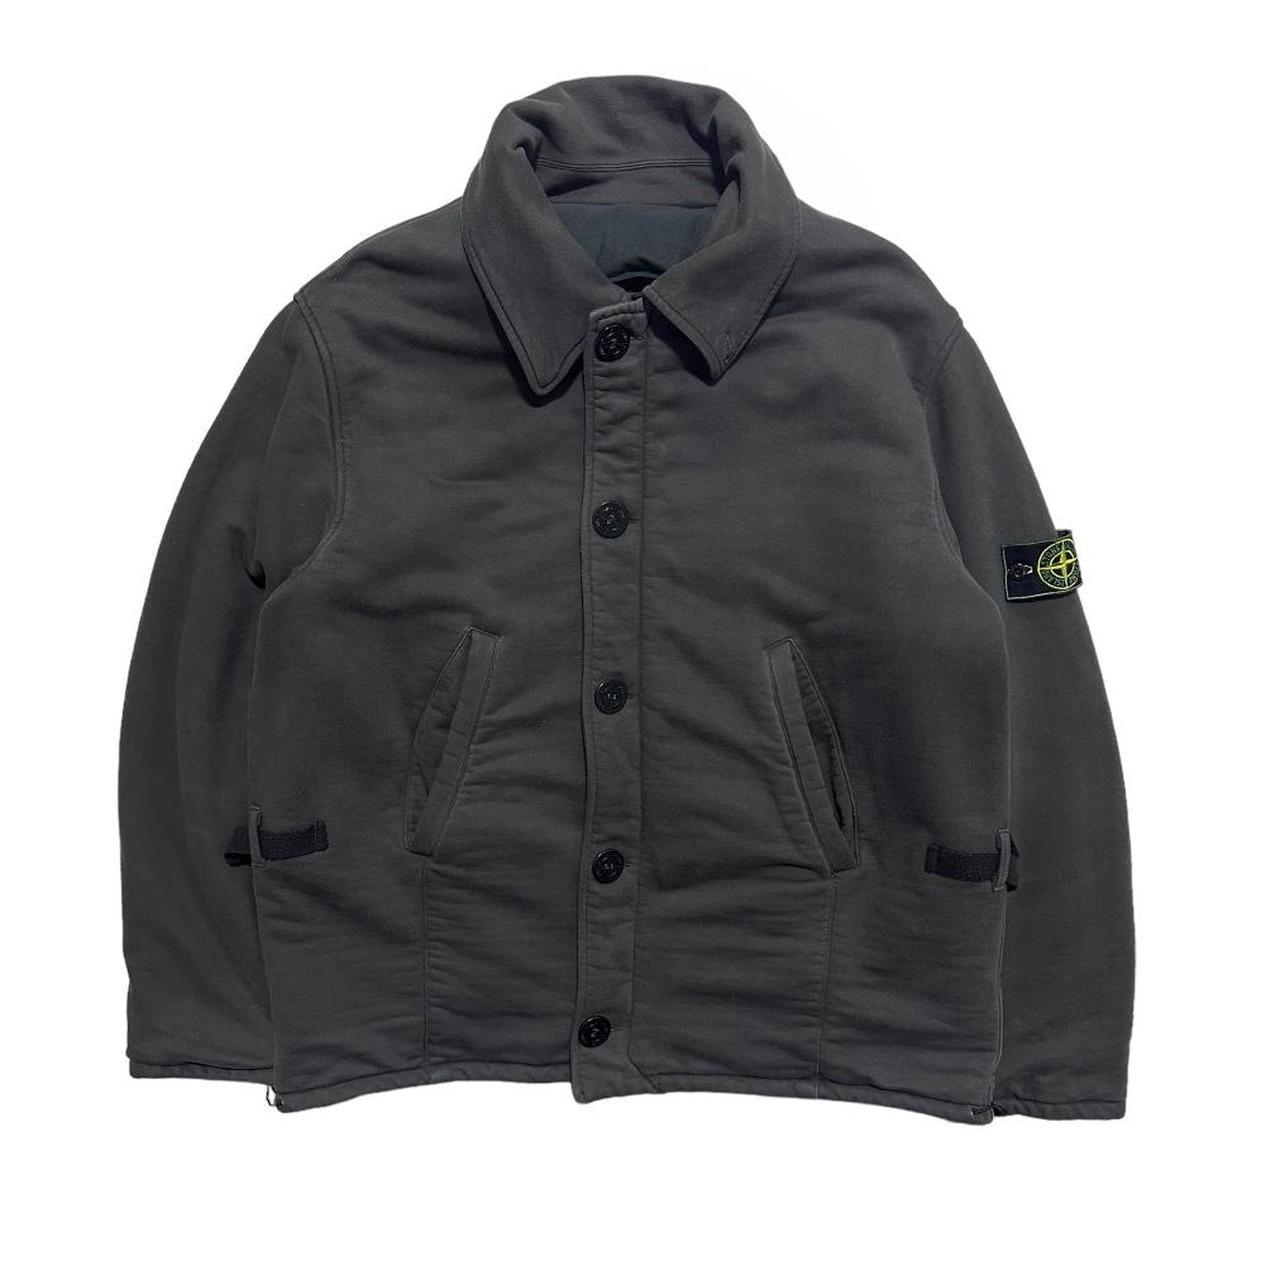 Stone Island Heavy Revesible Jacket - Known Source